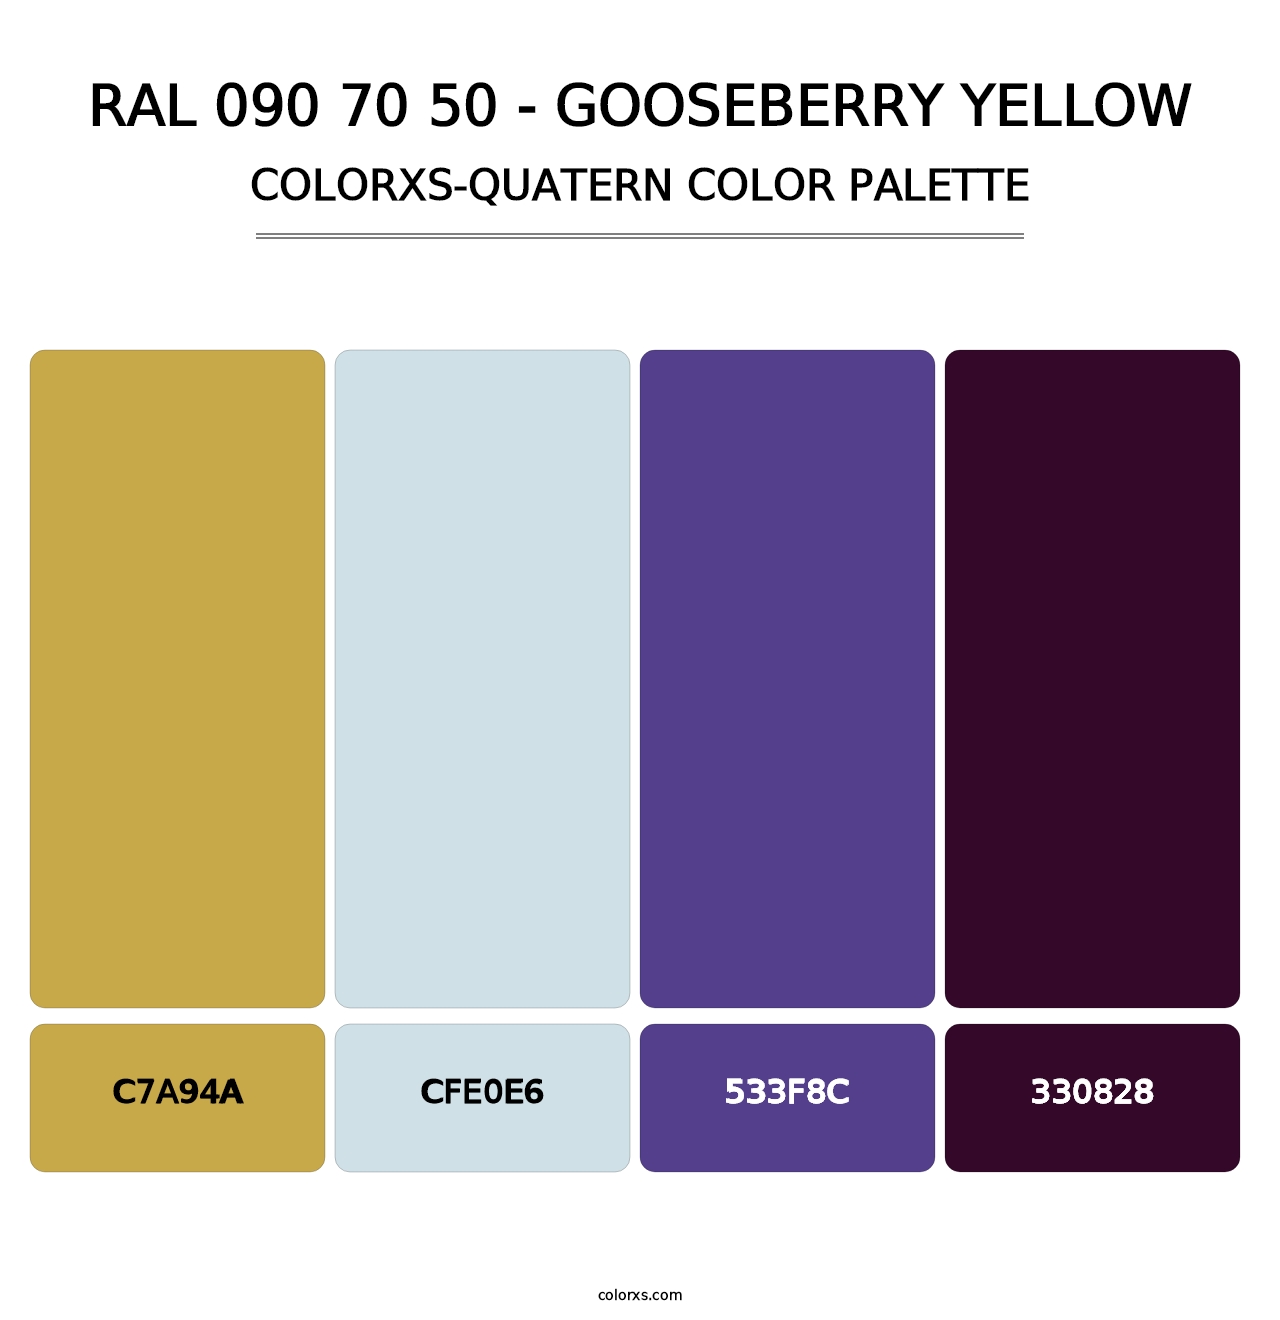 RAL 090 70 50 - Gooseberry Yellow - Colorxs Quatern Palette